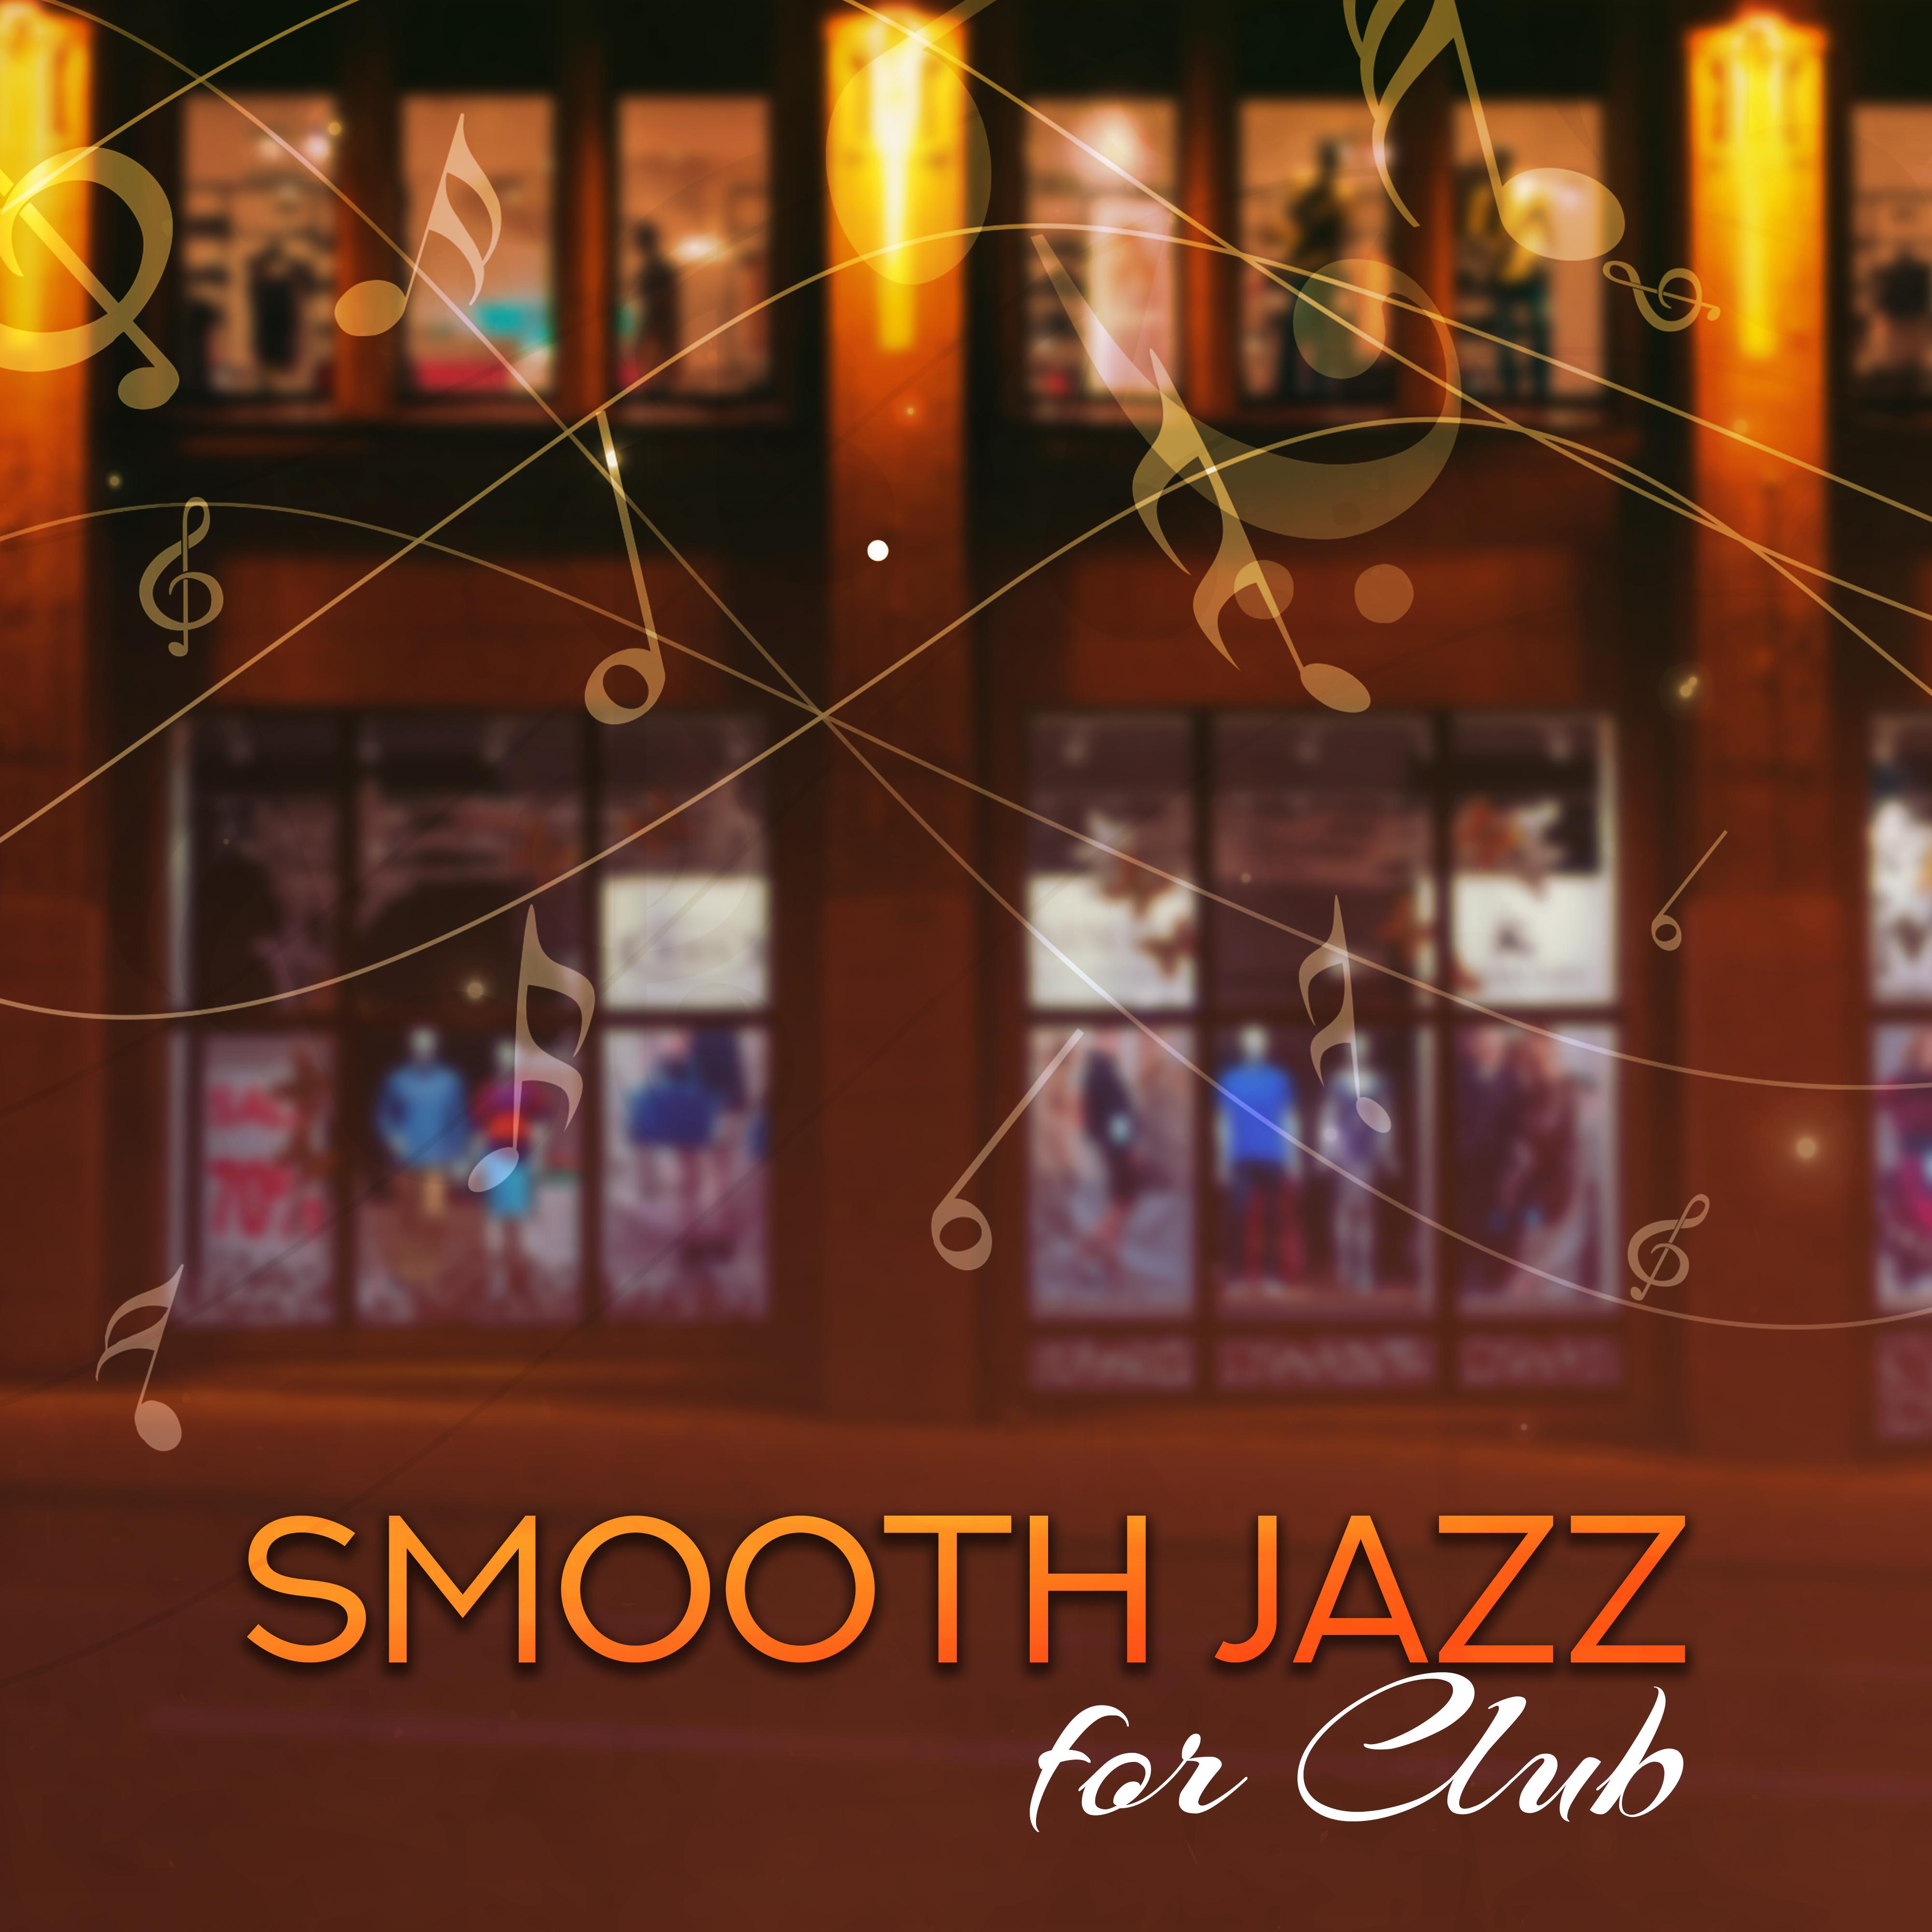 Smooth Jazz for Club – Easy Listening, Calm Music, Jazz Club, Evening Relaxation